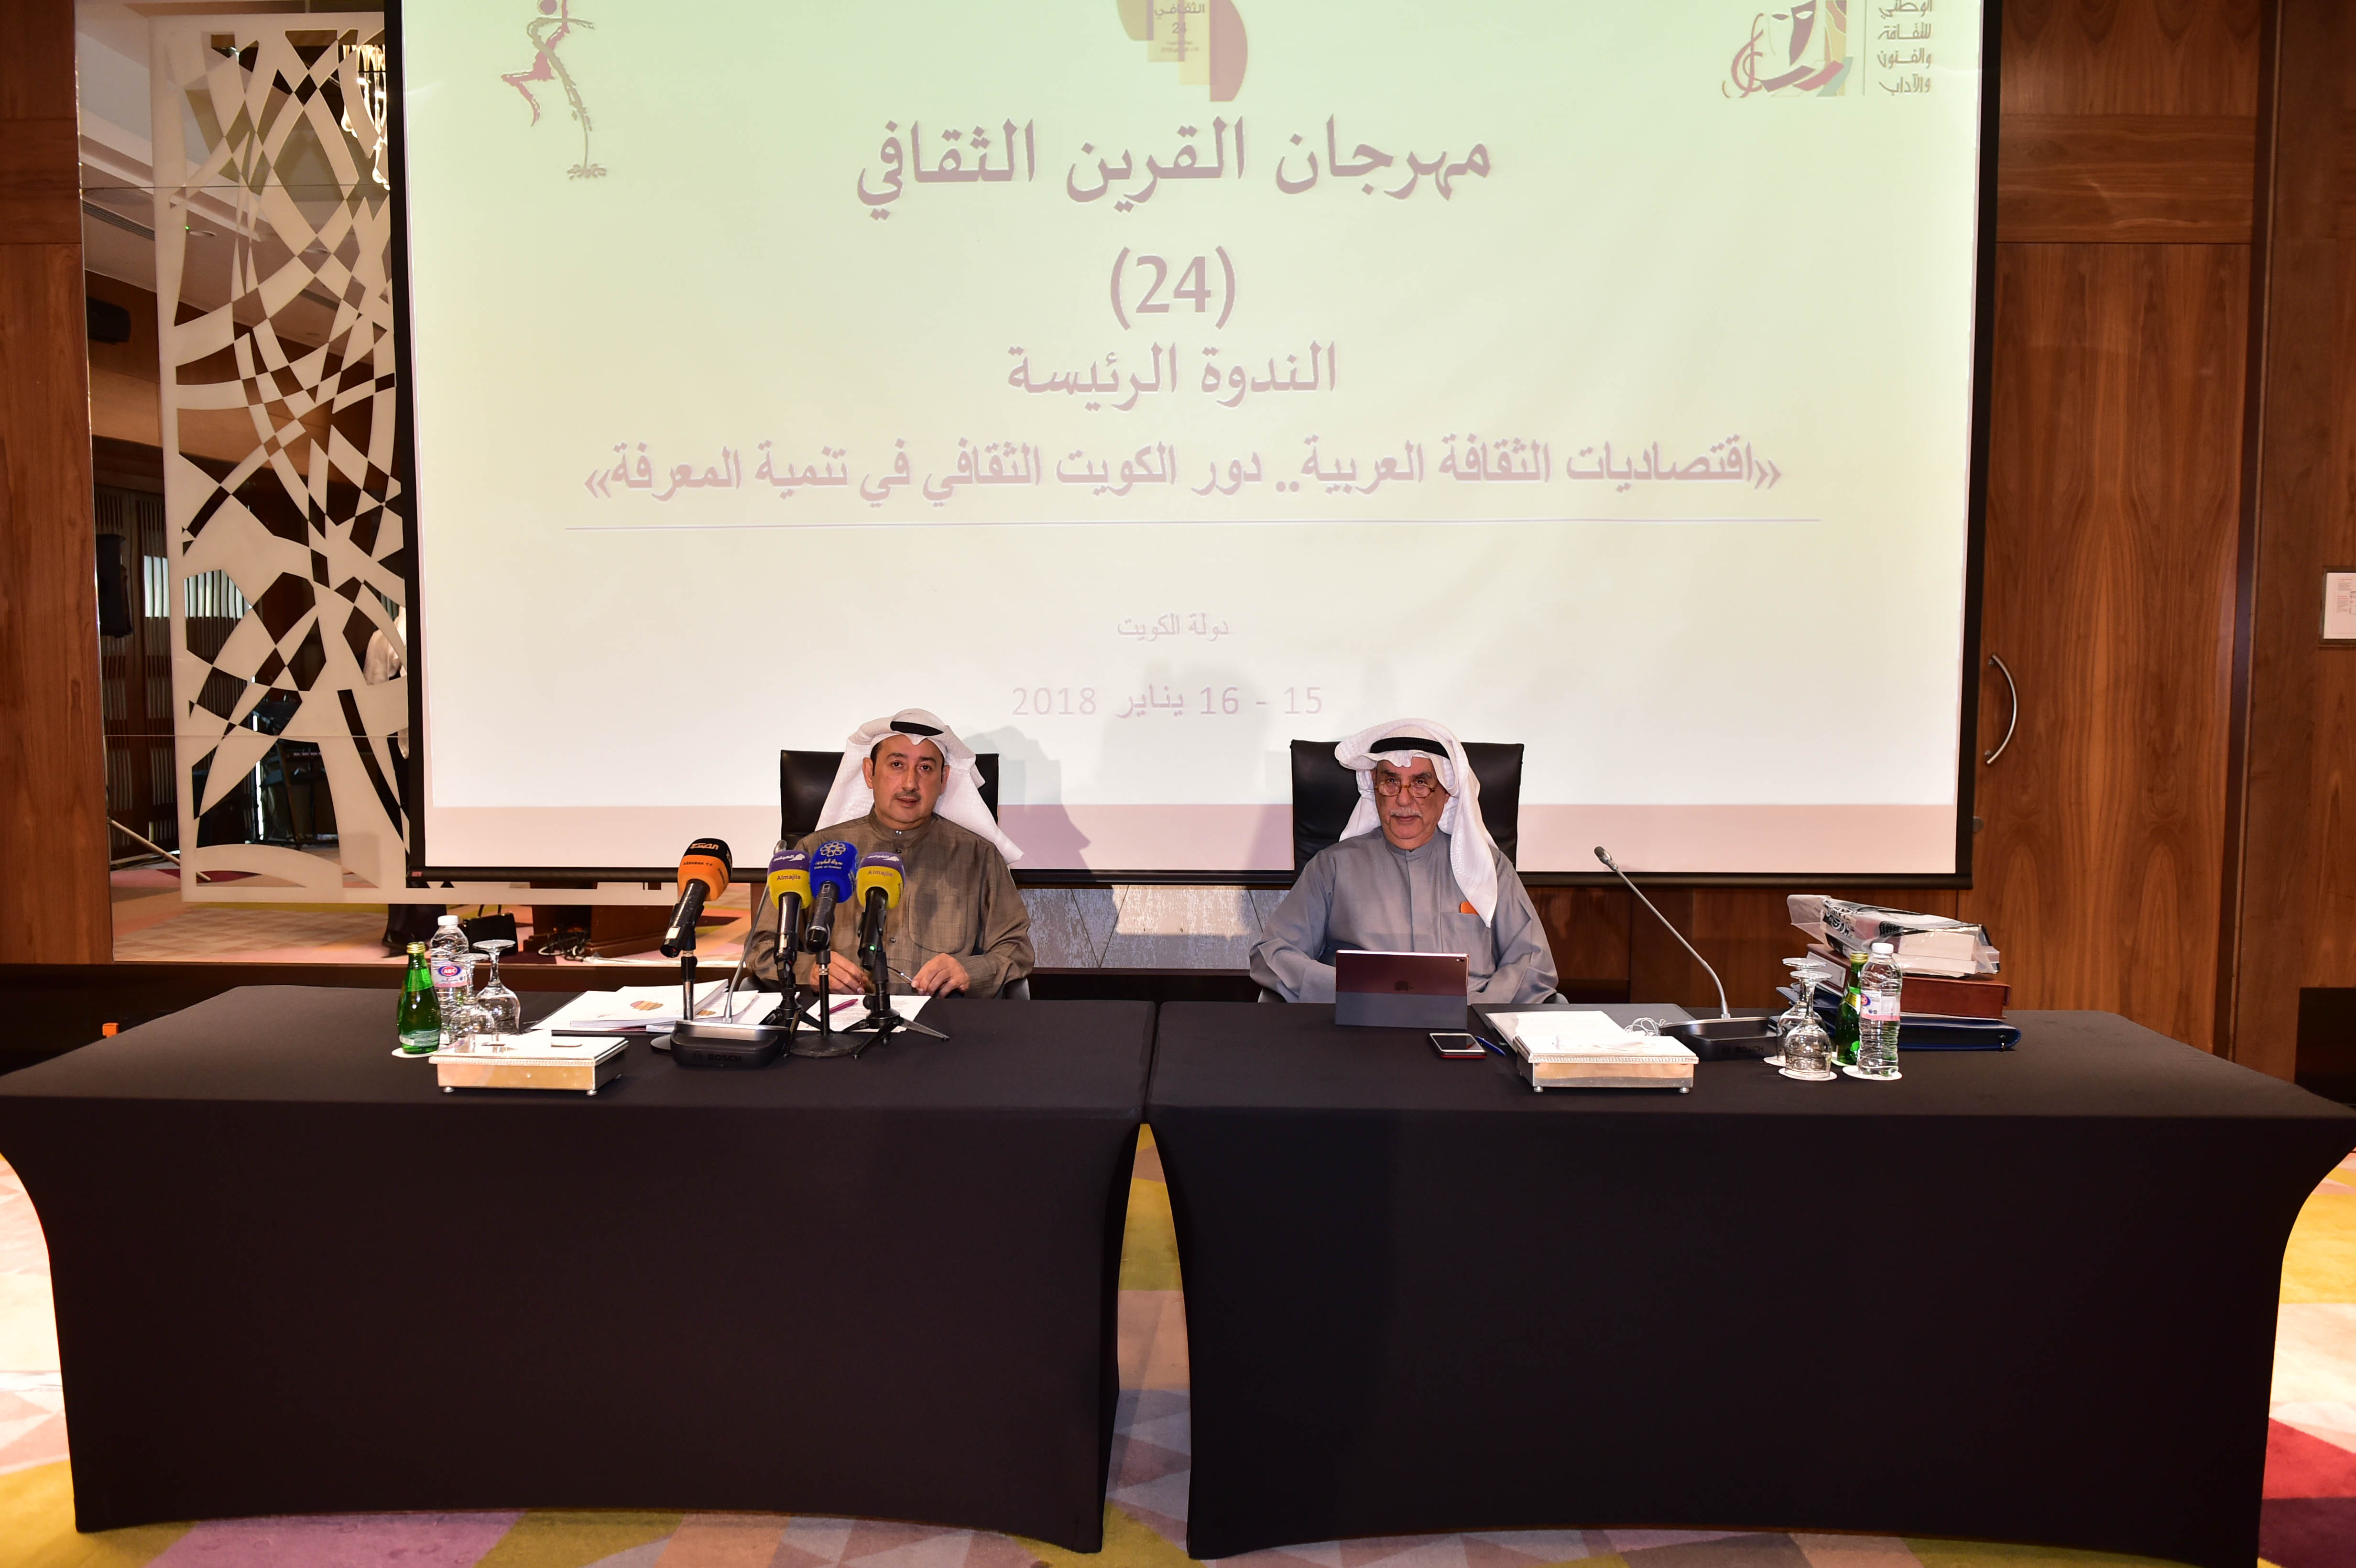 Symposium, entitled "Economies of Arab culture, and Kuwait's role in knowledge enrichment", as part of the ongoing 24th edition of Al-Qurain Cultural Festival